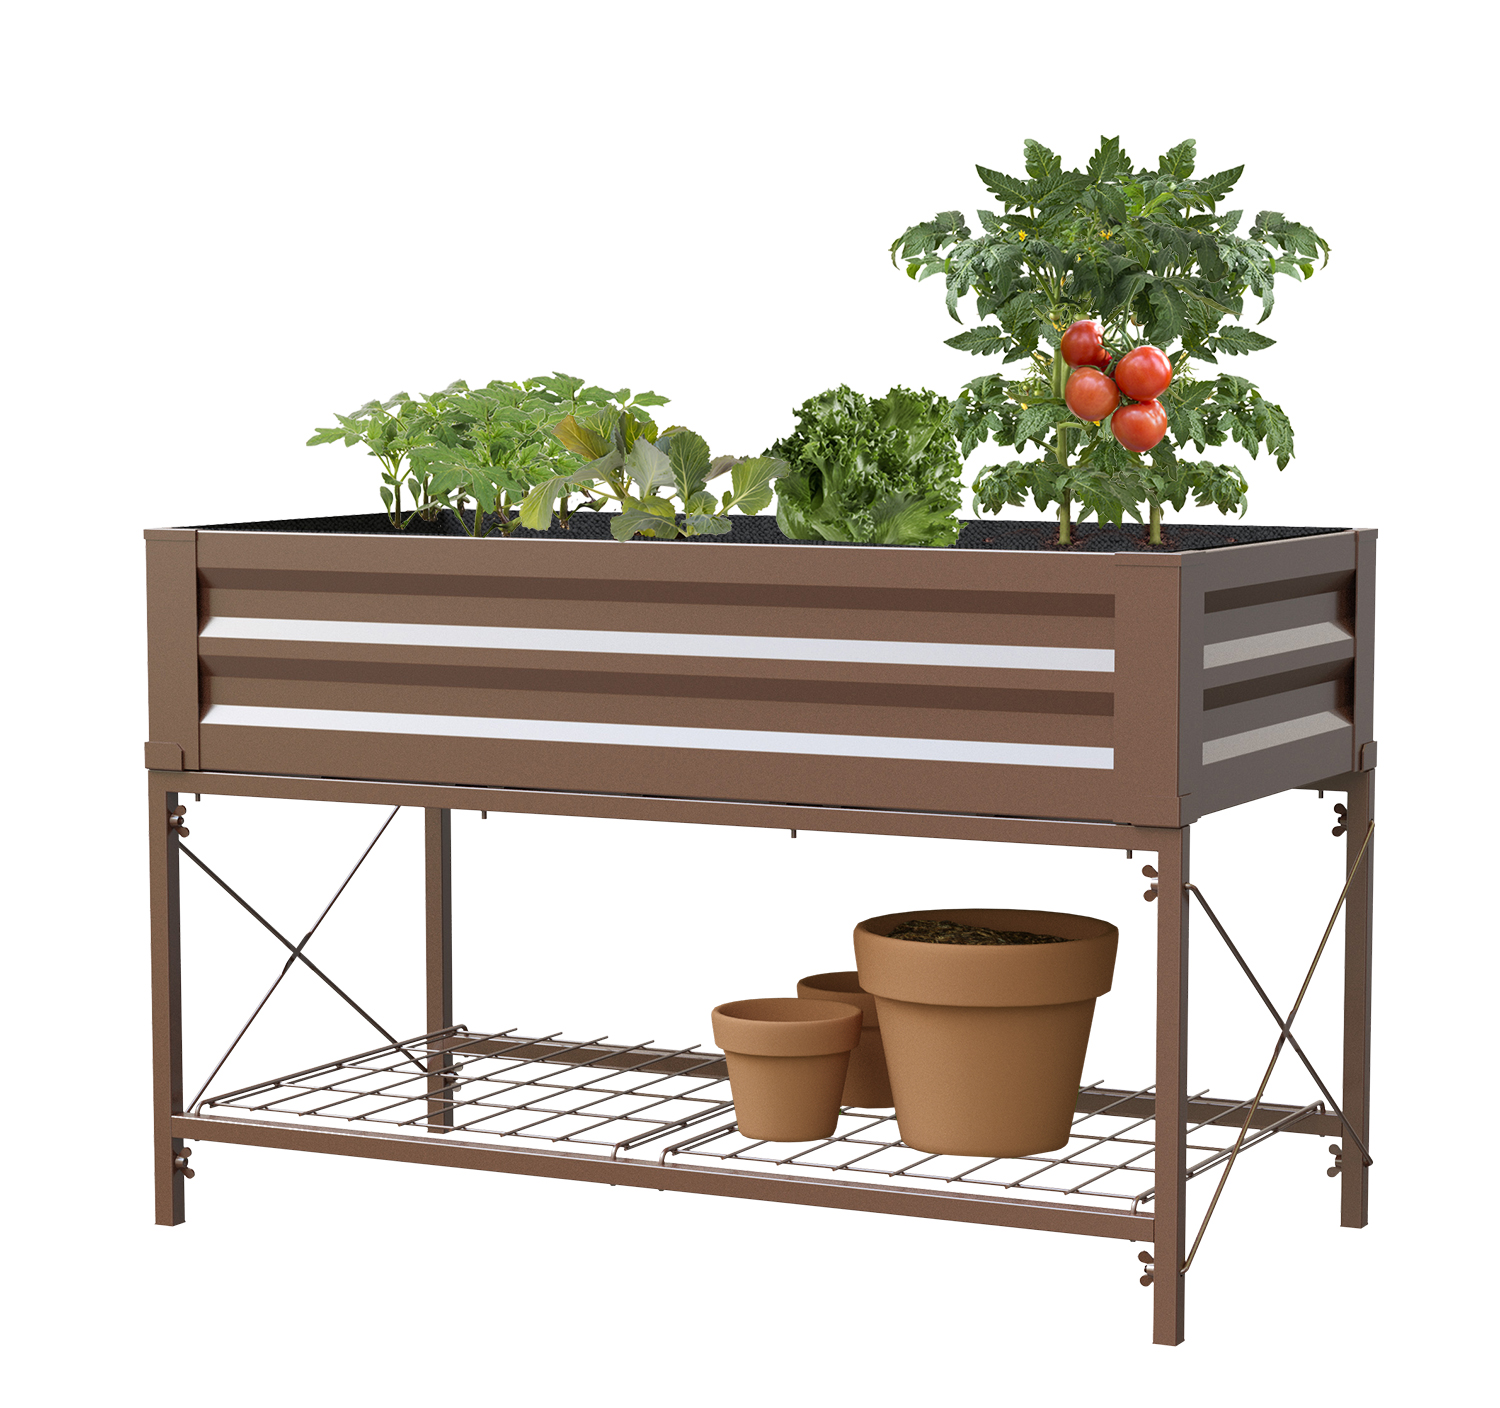 Woodlink Stand Up No Tools, Metal Raised Garden Planter with liner, 46"W x 32"H x 24"D, Timber Brown, 1/cs